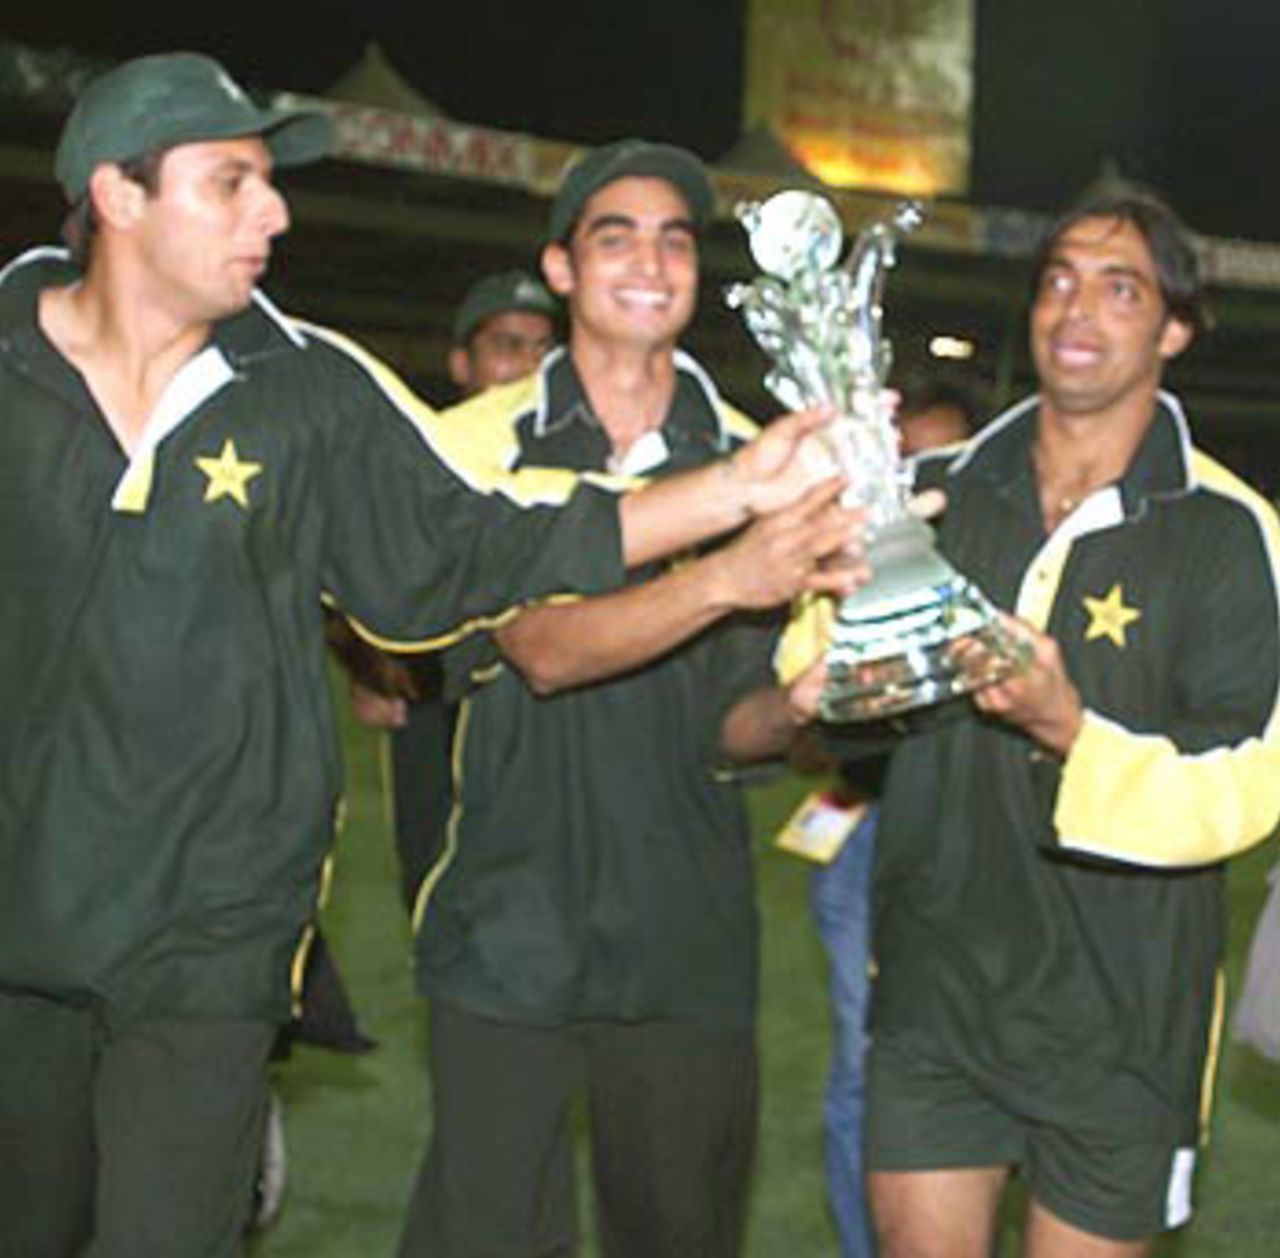 Shahid Afridi, Imran Nazir and Shoaib Akhtar exult after Pakistan lift the Coca Cola Cup 2000, Pakistan v South Africa, Coca-Cola Cup 1999/00, Final, Sharjah C.A. Stadium, 31 March 2000.